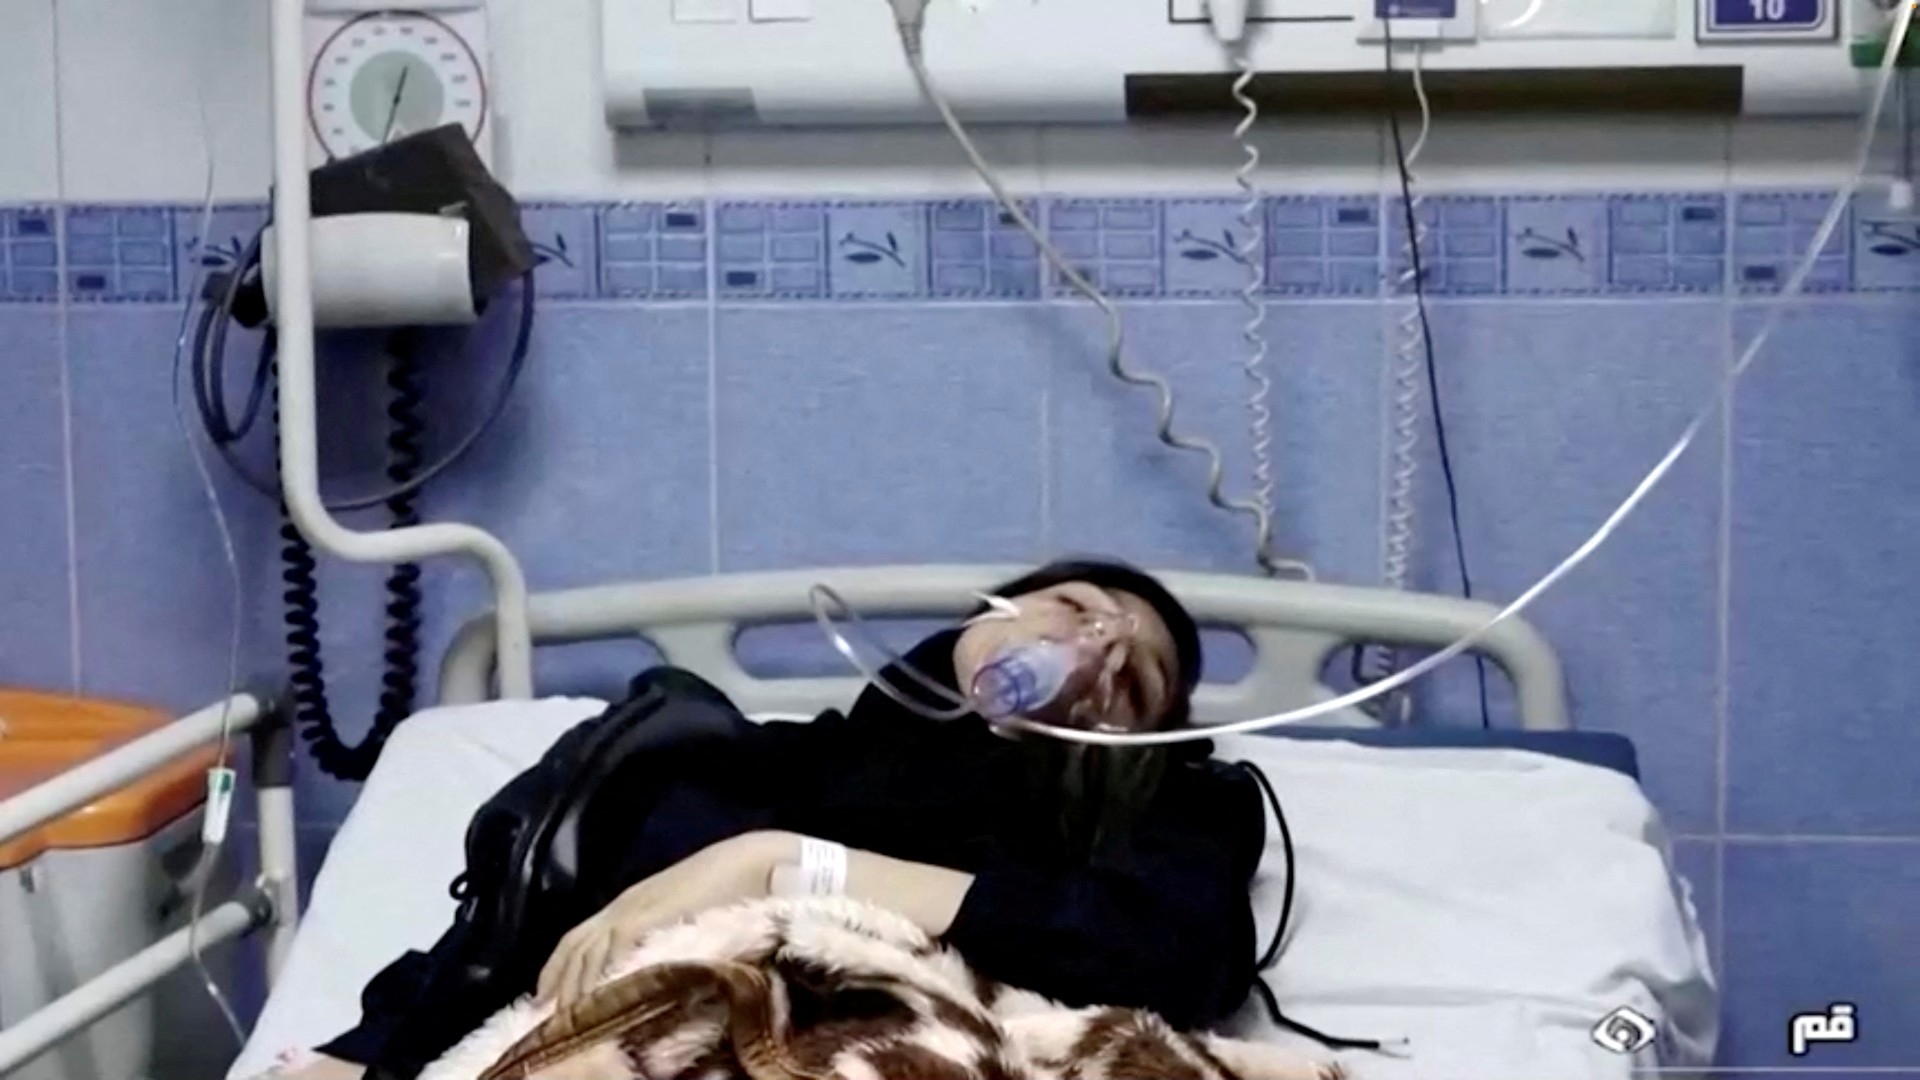 A young woman lies in hospital after reports of poisoning at an unspecified location in Iran in this still image from video from 2 March (Reuters)